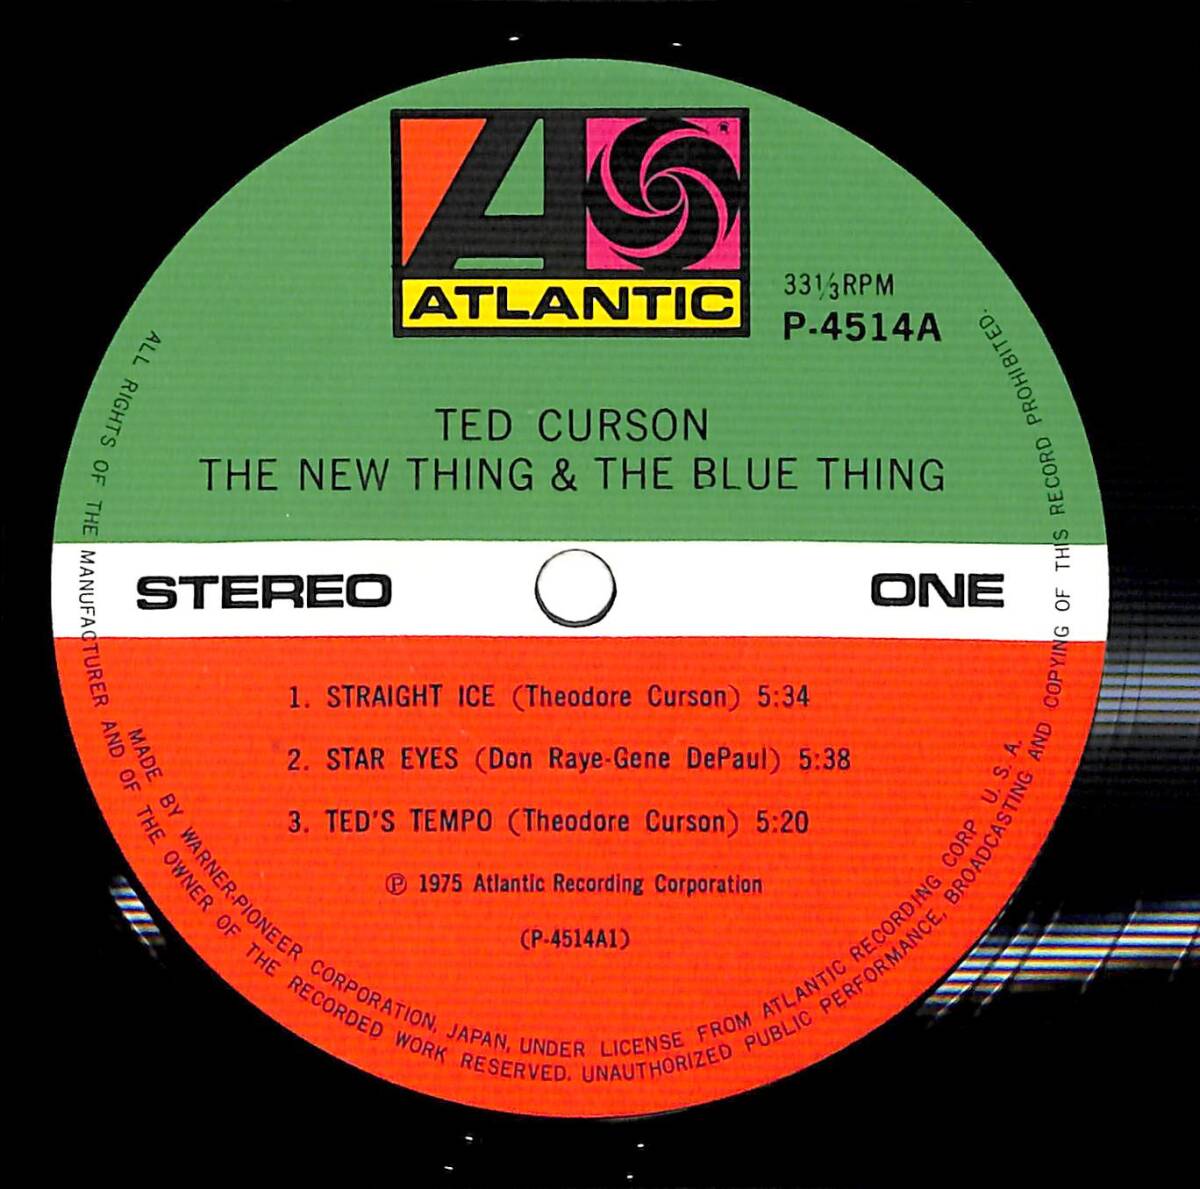 e3655/LP/Ted Curson/The New Thing & The Blue Thing/テッド・カーソン/ニューシング＆ブルー・シングの画像3